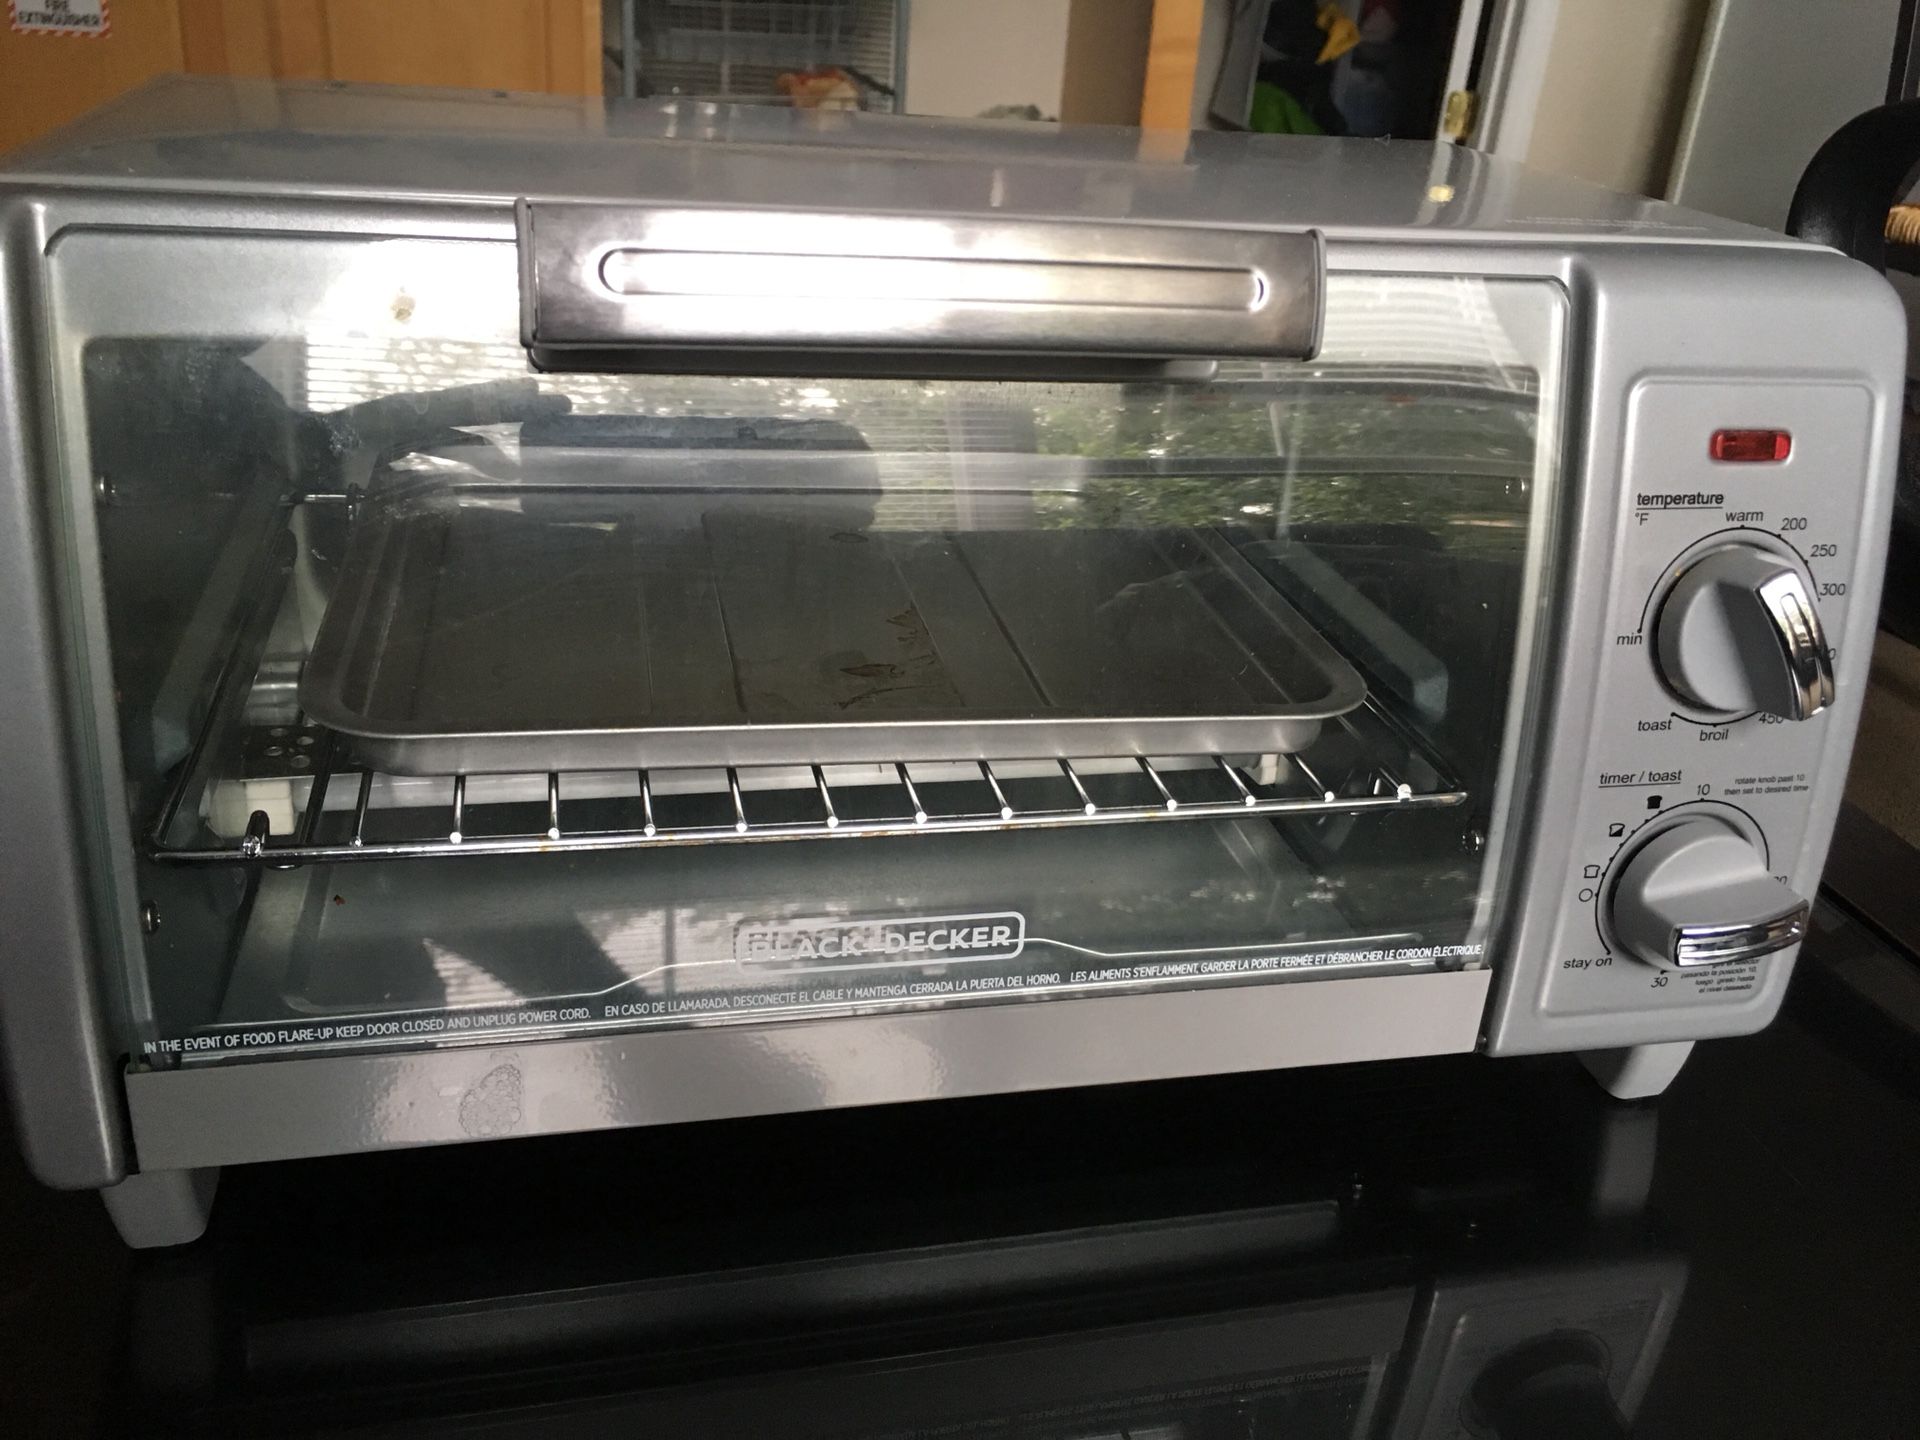 Toaster oven. Open box new